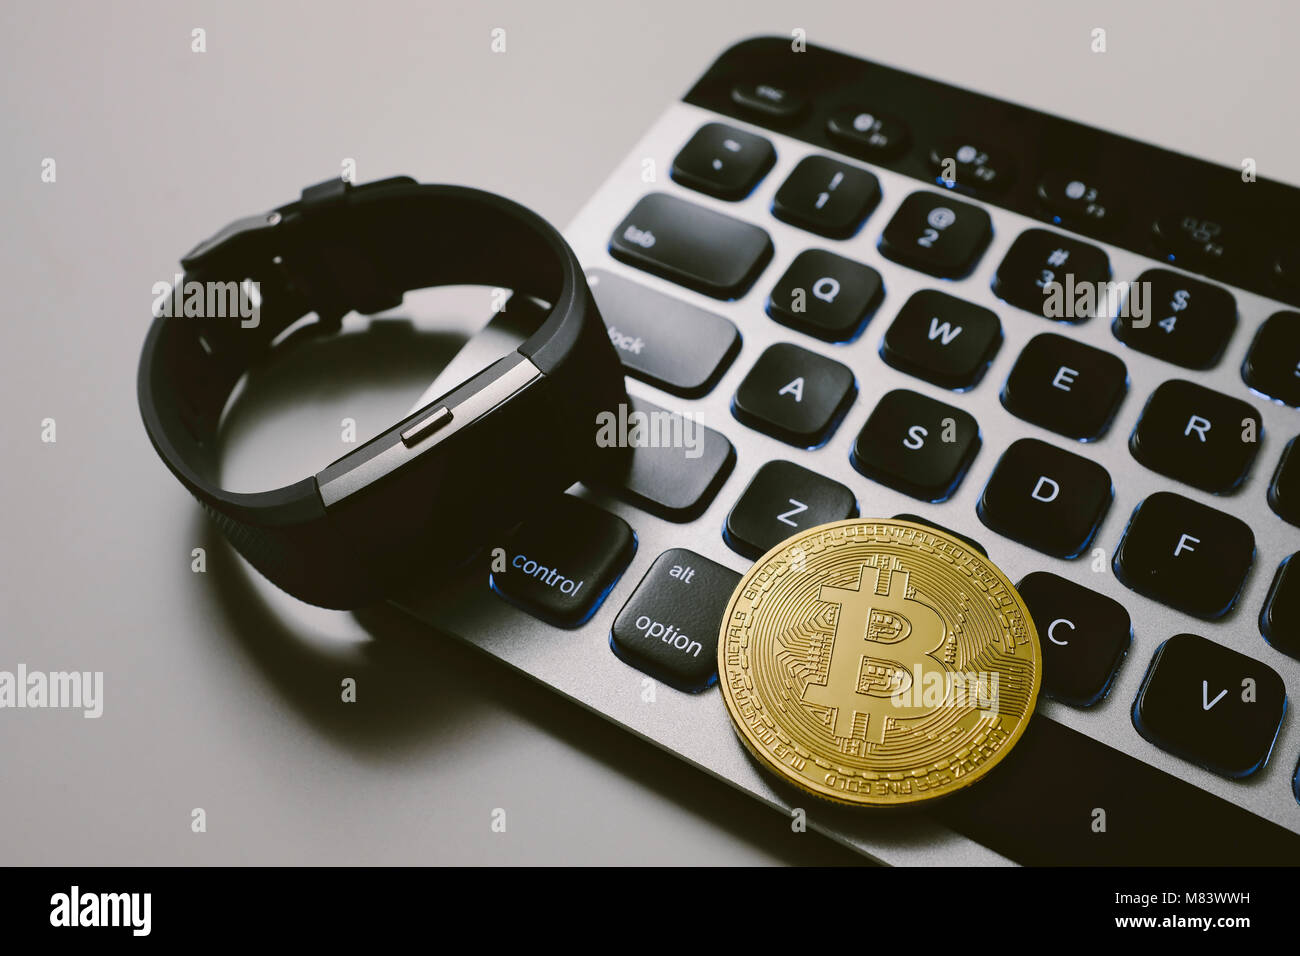 Bitcoin on keyboard with fitness tracker watch Stock Photo